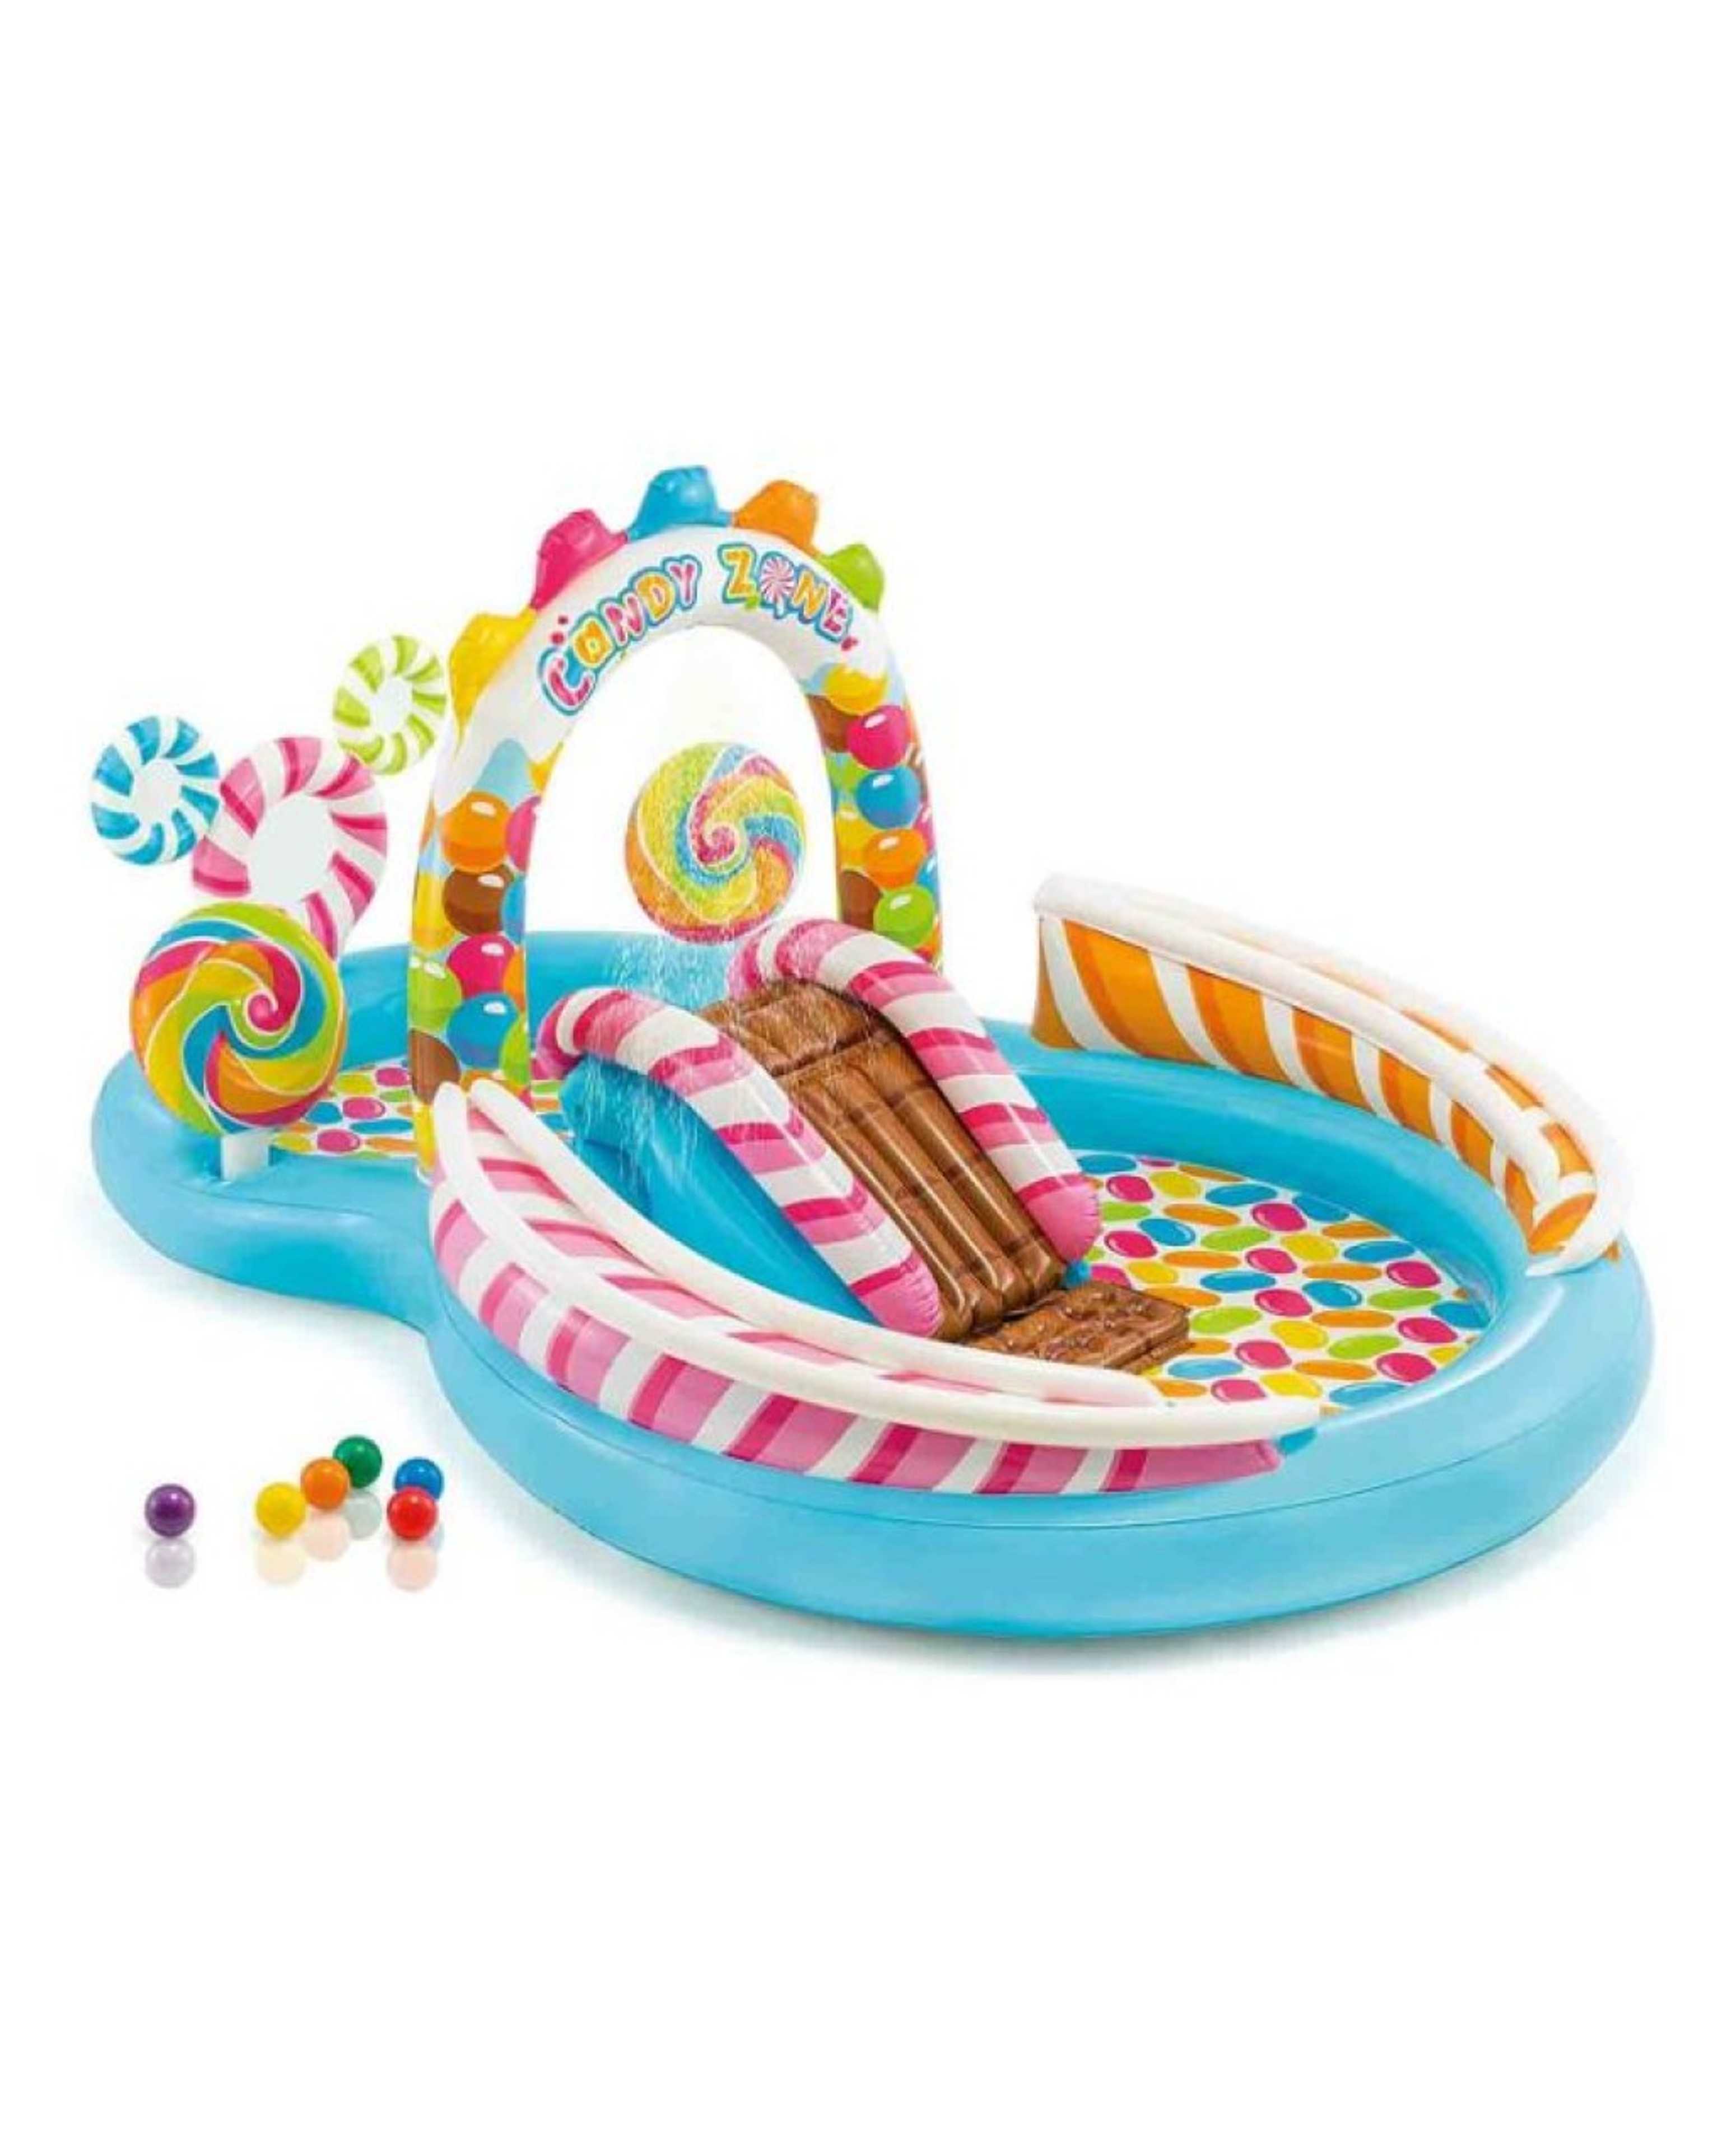 INTEX CANDY ZONE PLAY CENTER 